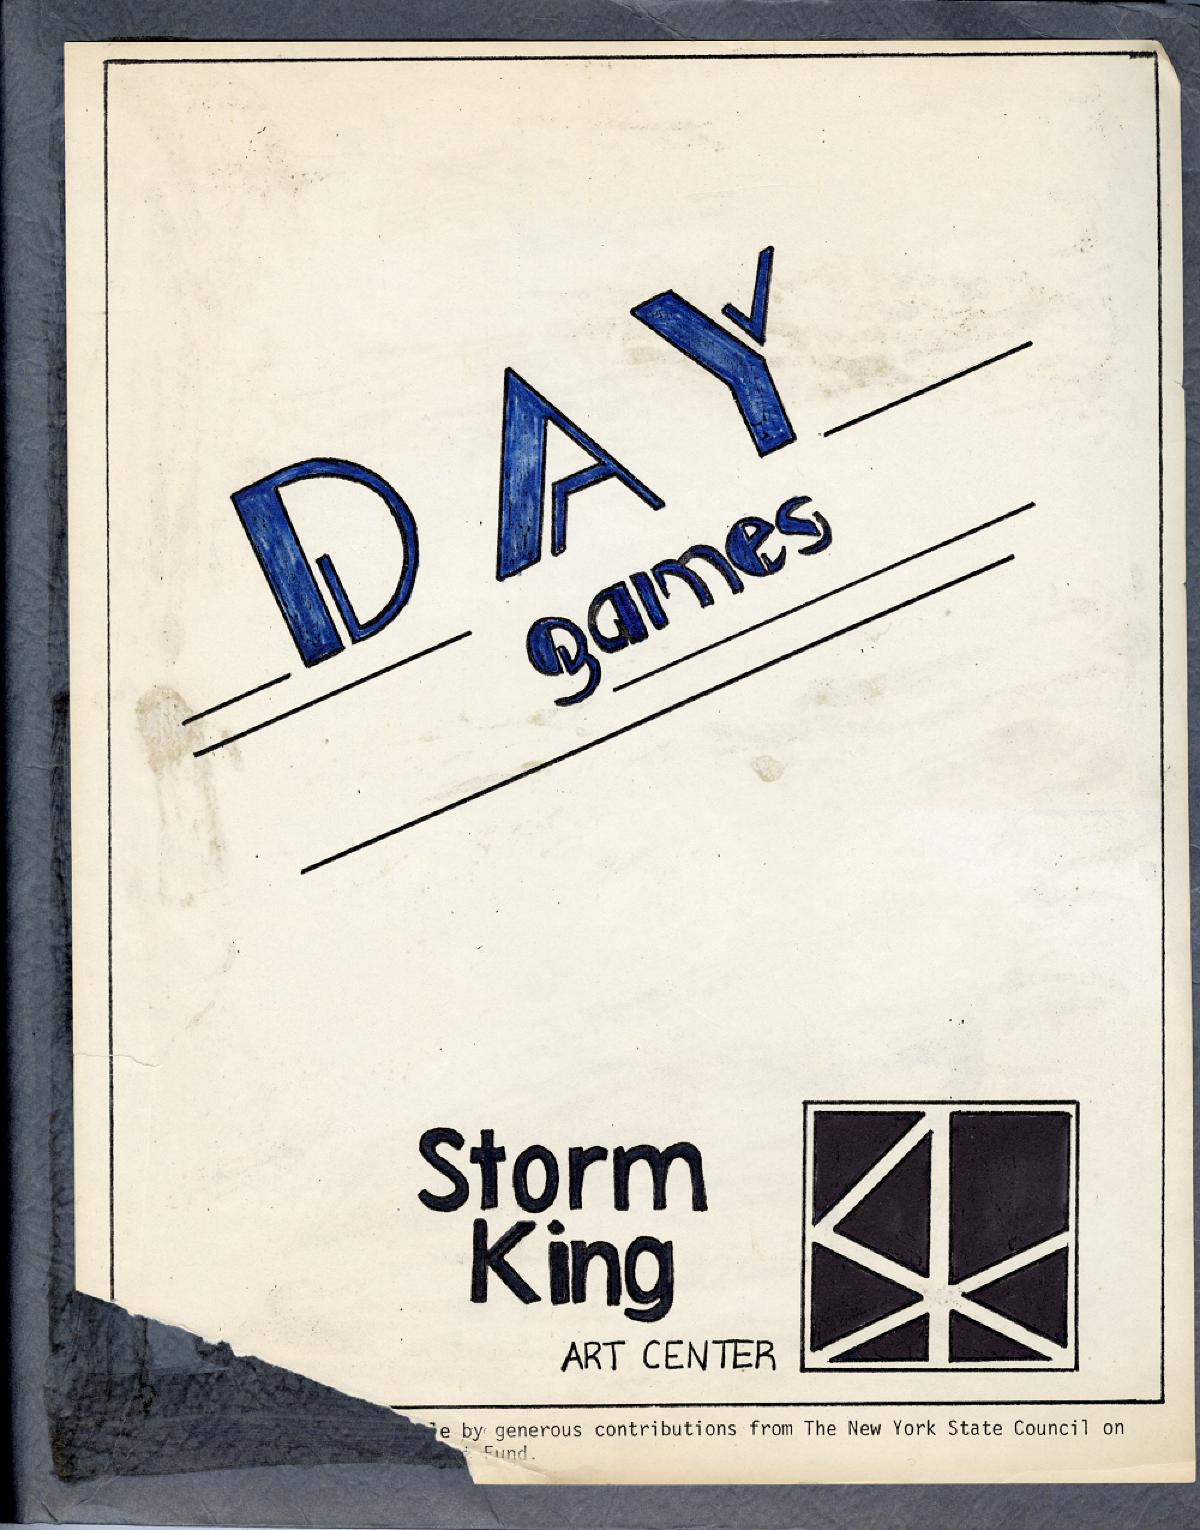 Day Games at Storm King Art Center (cover), 1984